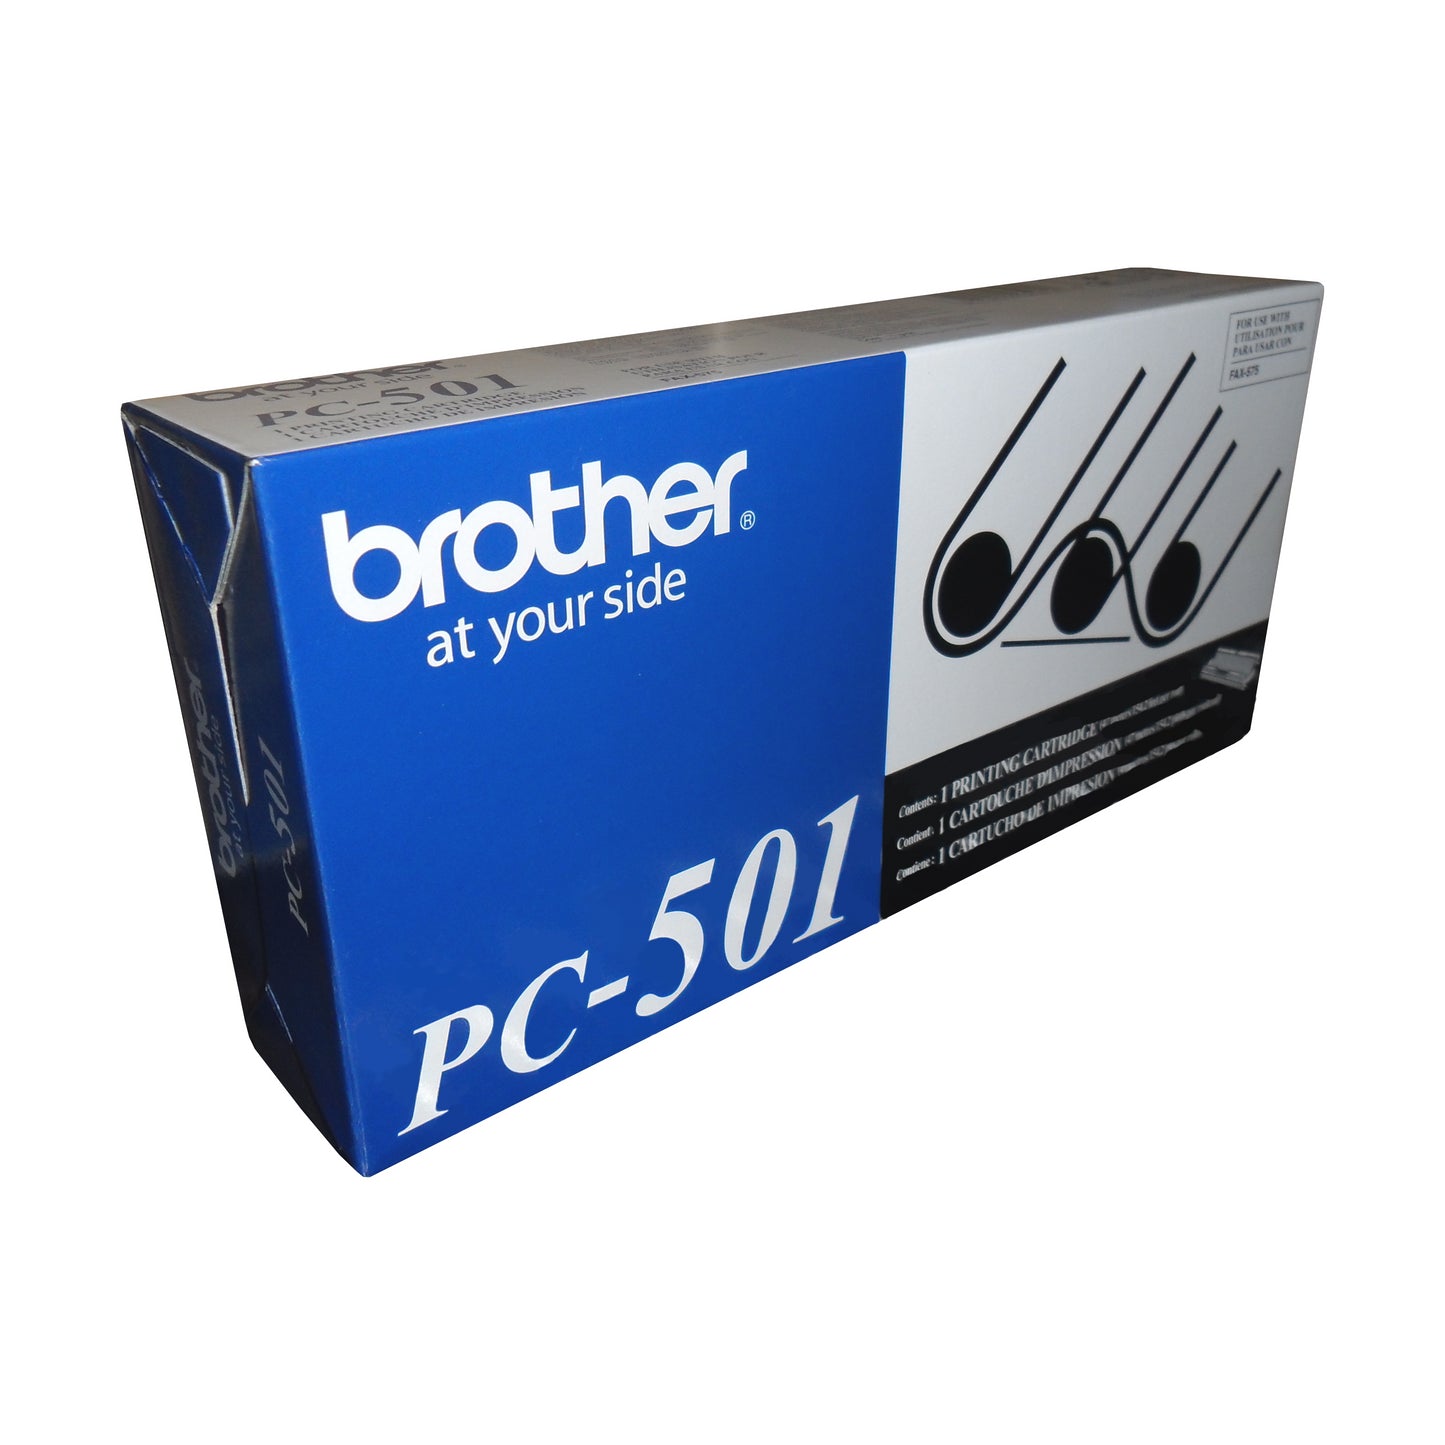 PC501 Brother Print Cartridge For FAX575  Refill IS PC402RF